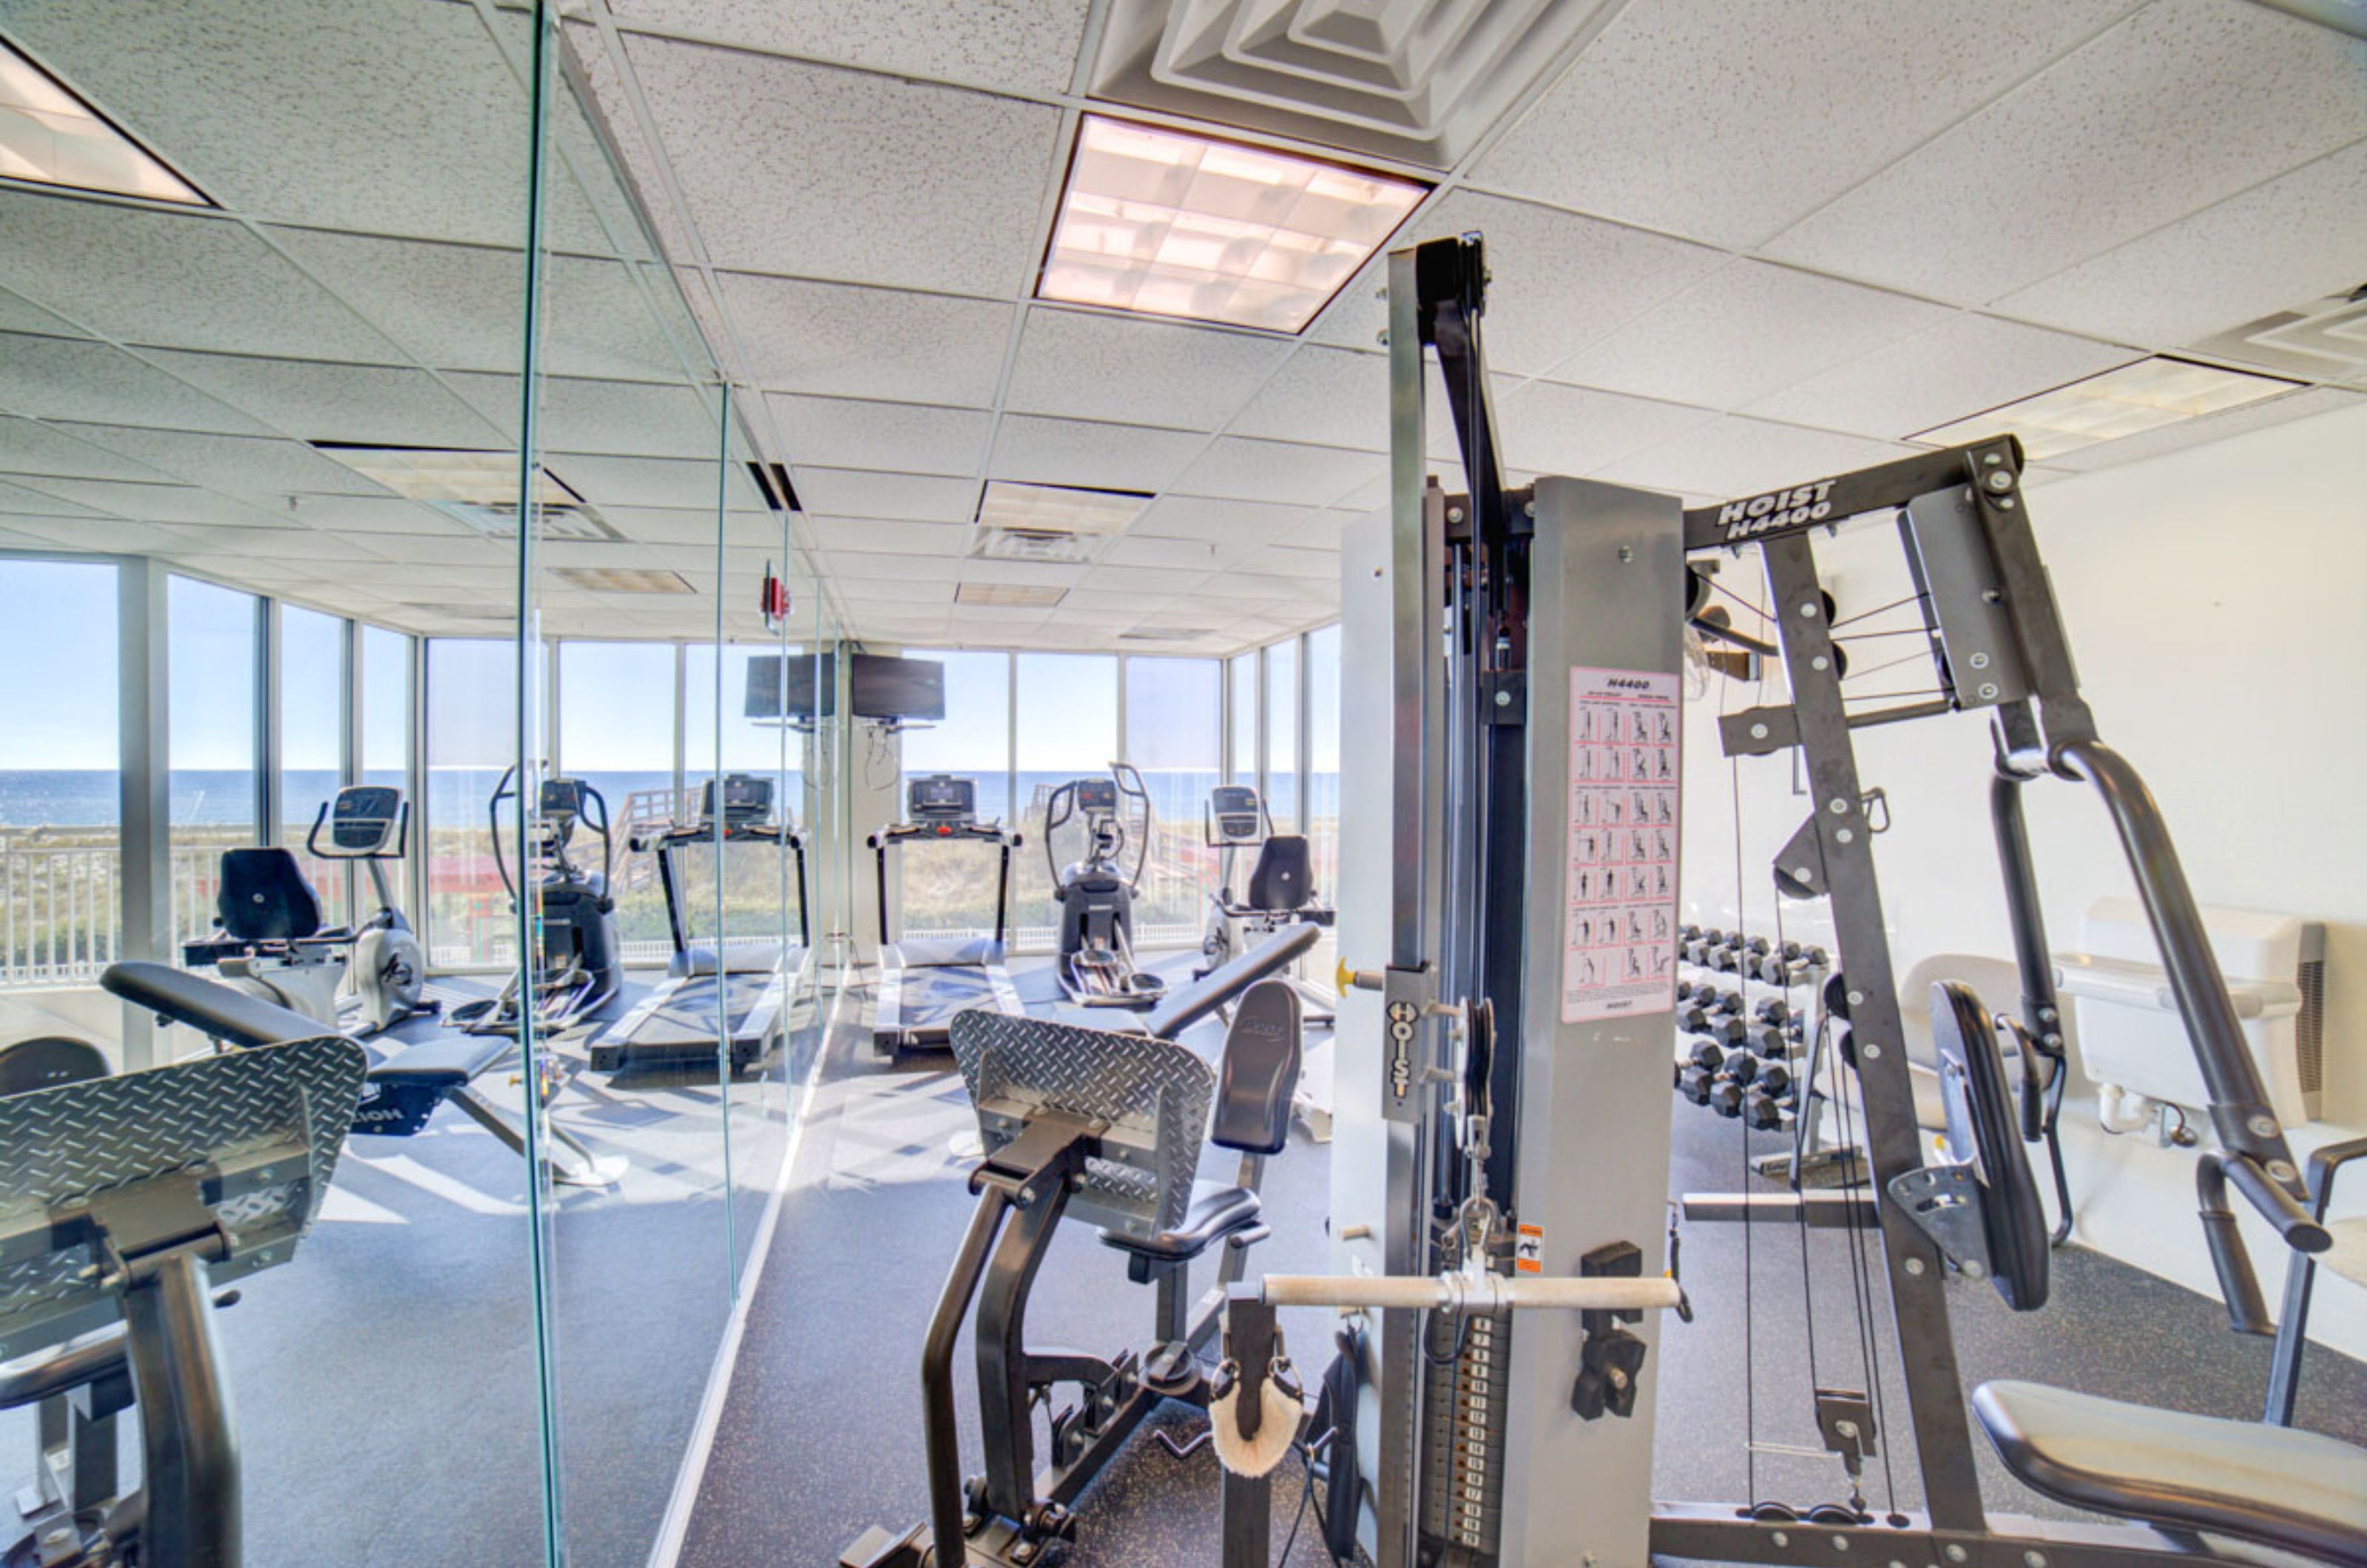 Strength and cardio equipment in a fitness center overlooking the Gulf of Mexico